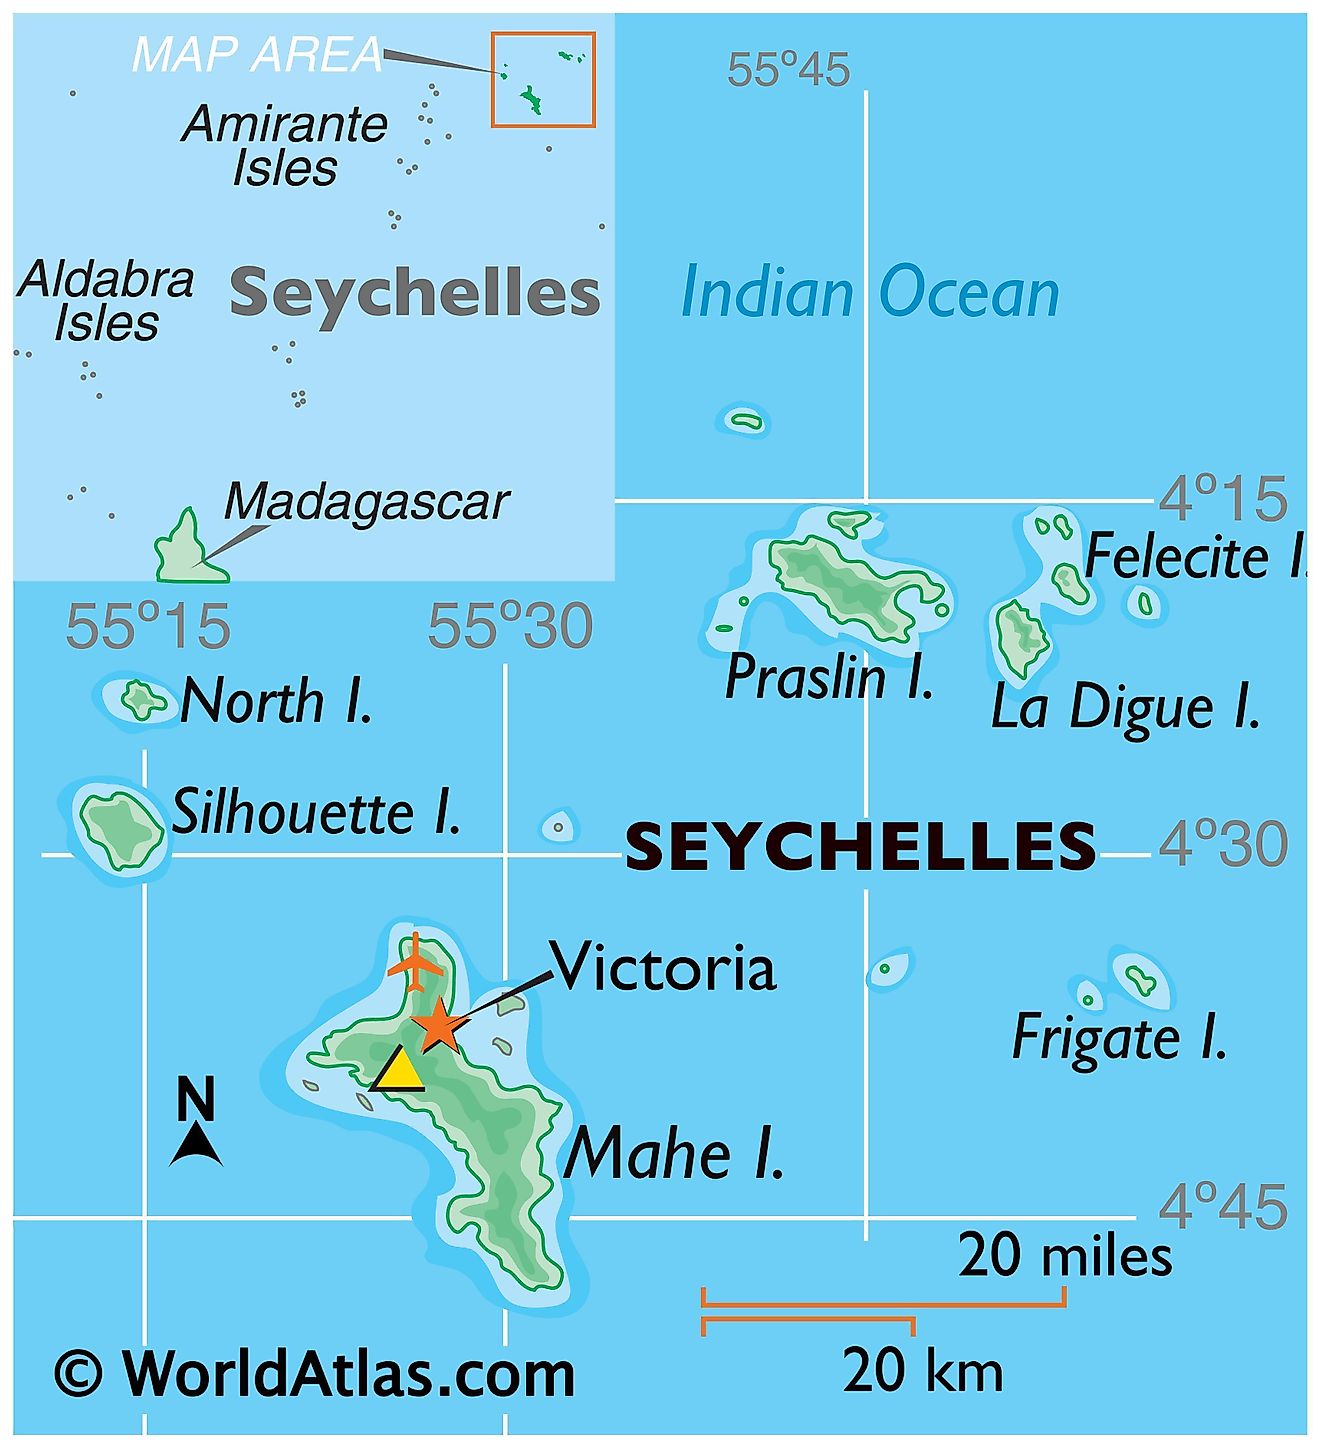 Phyiscal Map of Seychelles with state boundaries. It shows the major physical features of Seychelles including the main islands, terrain, and the nearest foreign territories.